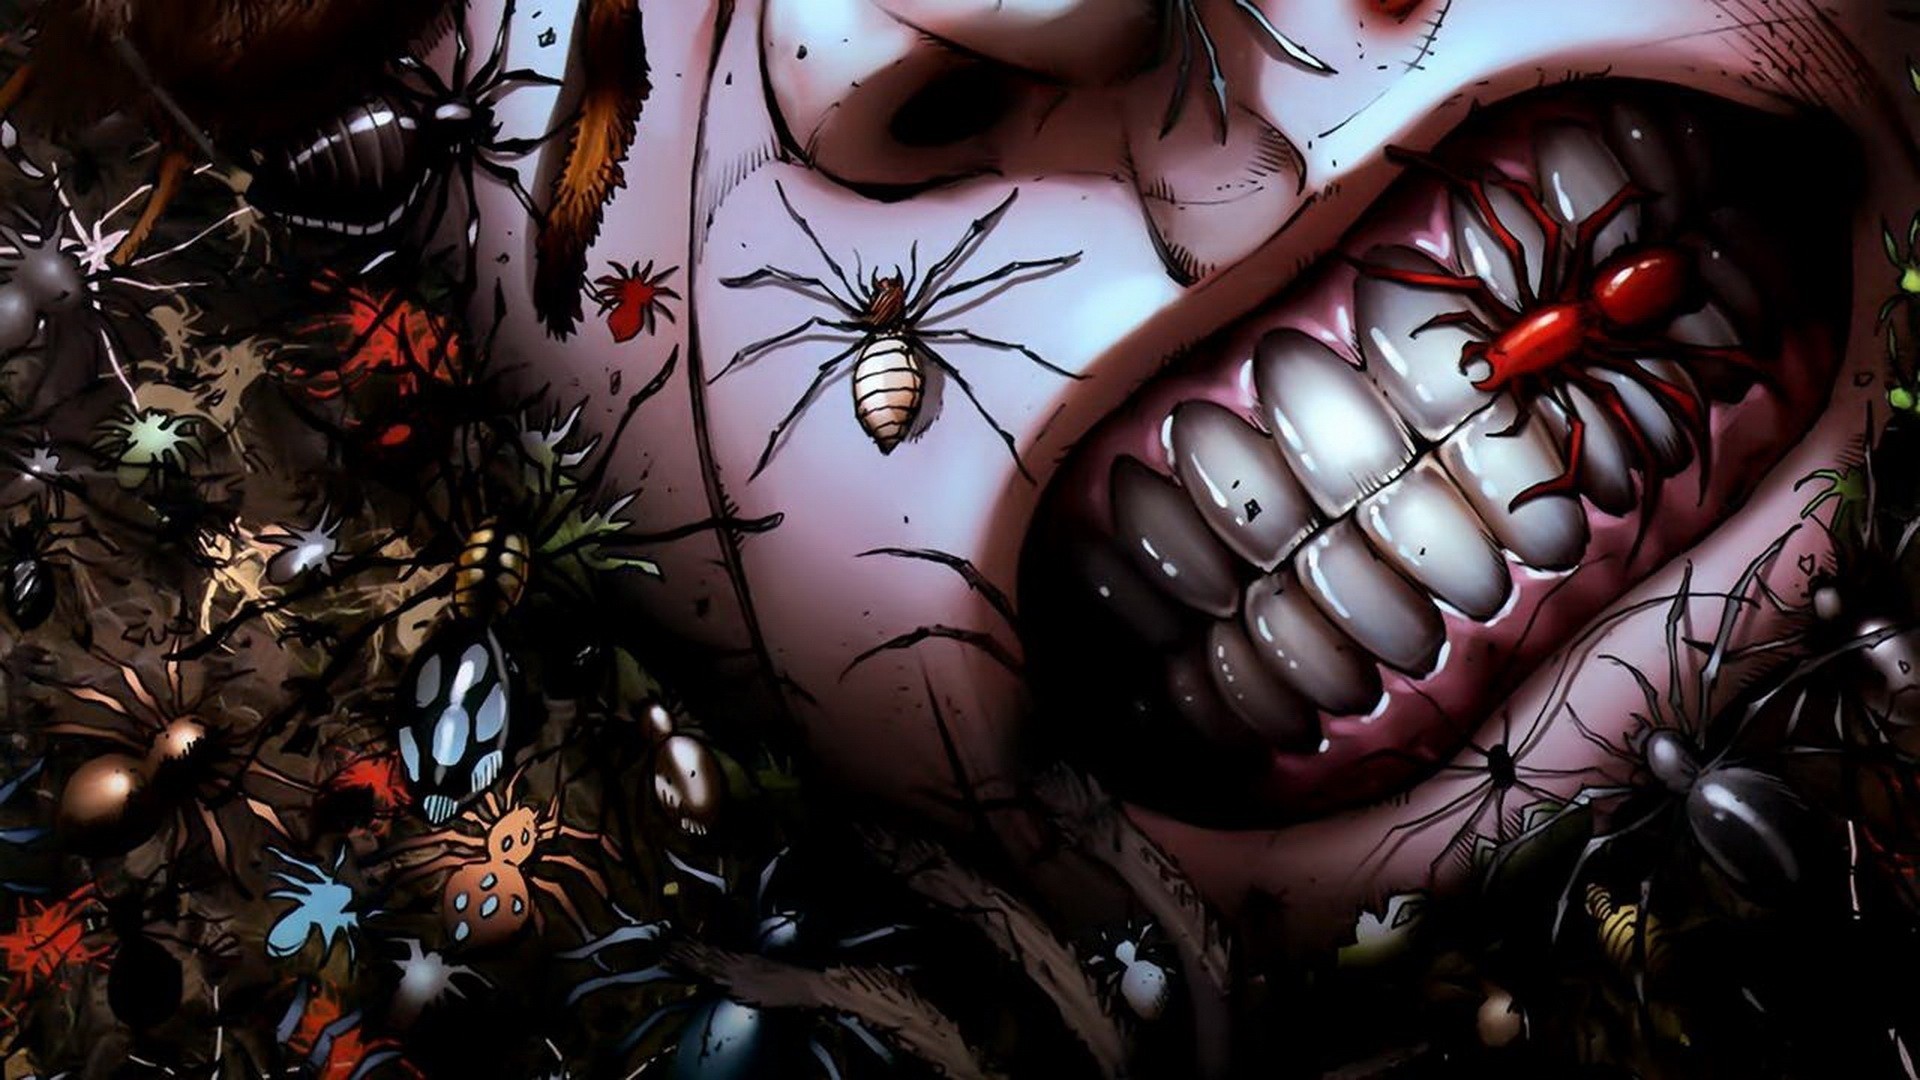 1920x1080 Grimm-Fairy-Tales comics anime dark horror insects spider grimace gross  spooky creepy scary wallpaper |  | 24177 | WallpaperUP